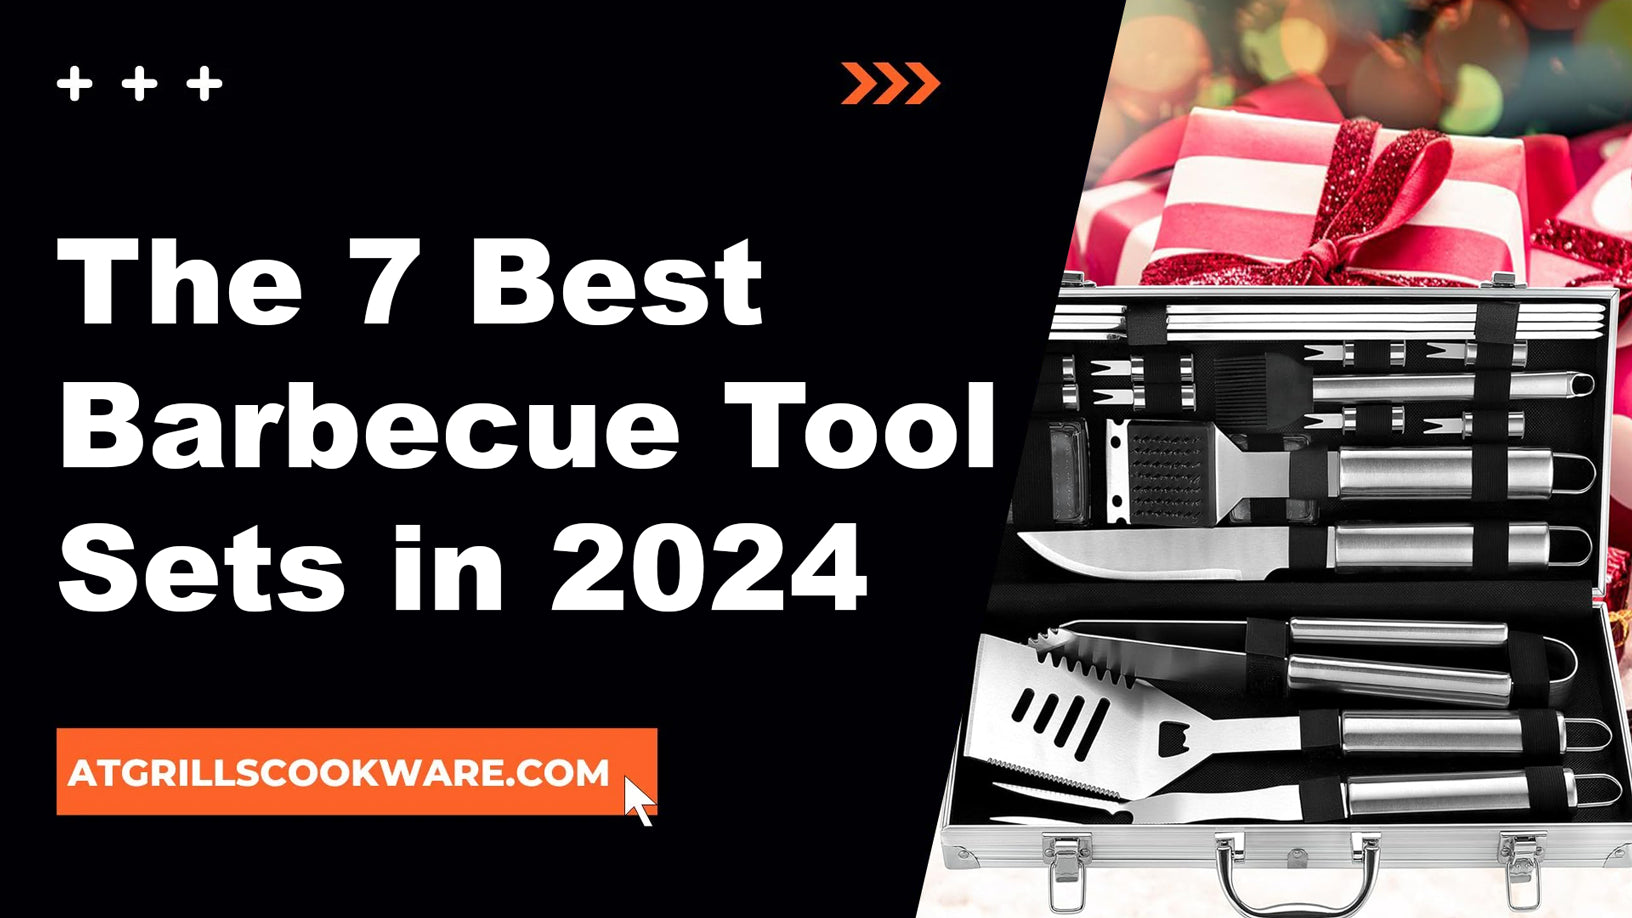 The 7 Best Barbecue Tool Sets in 2024 - ATGRILLS